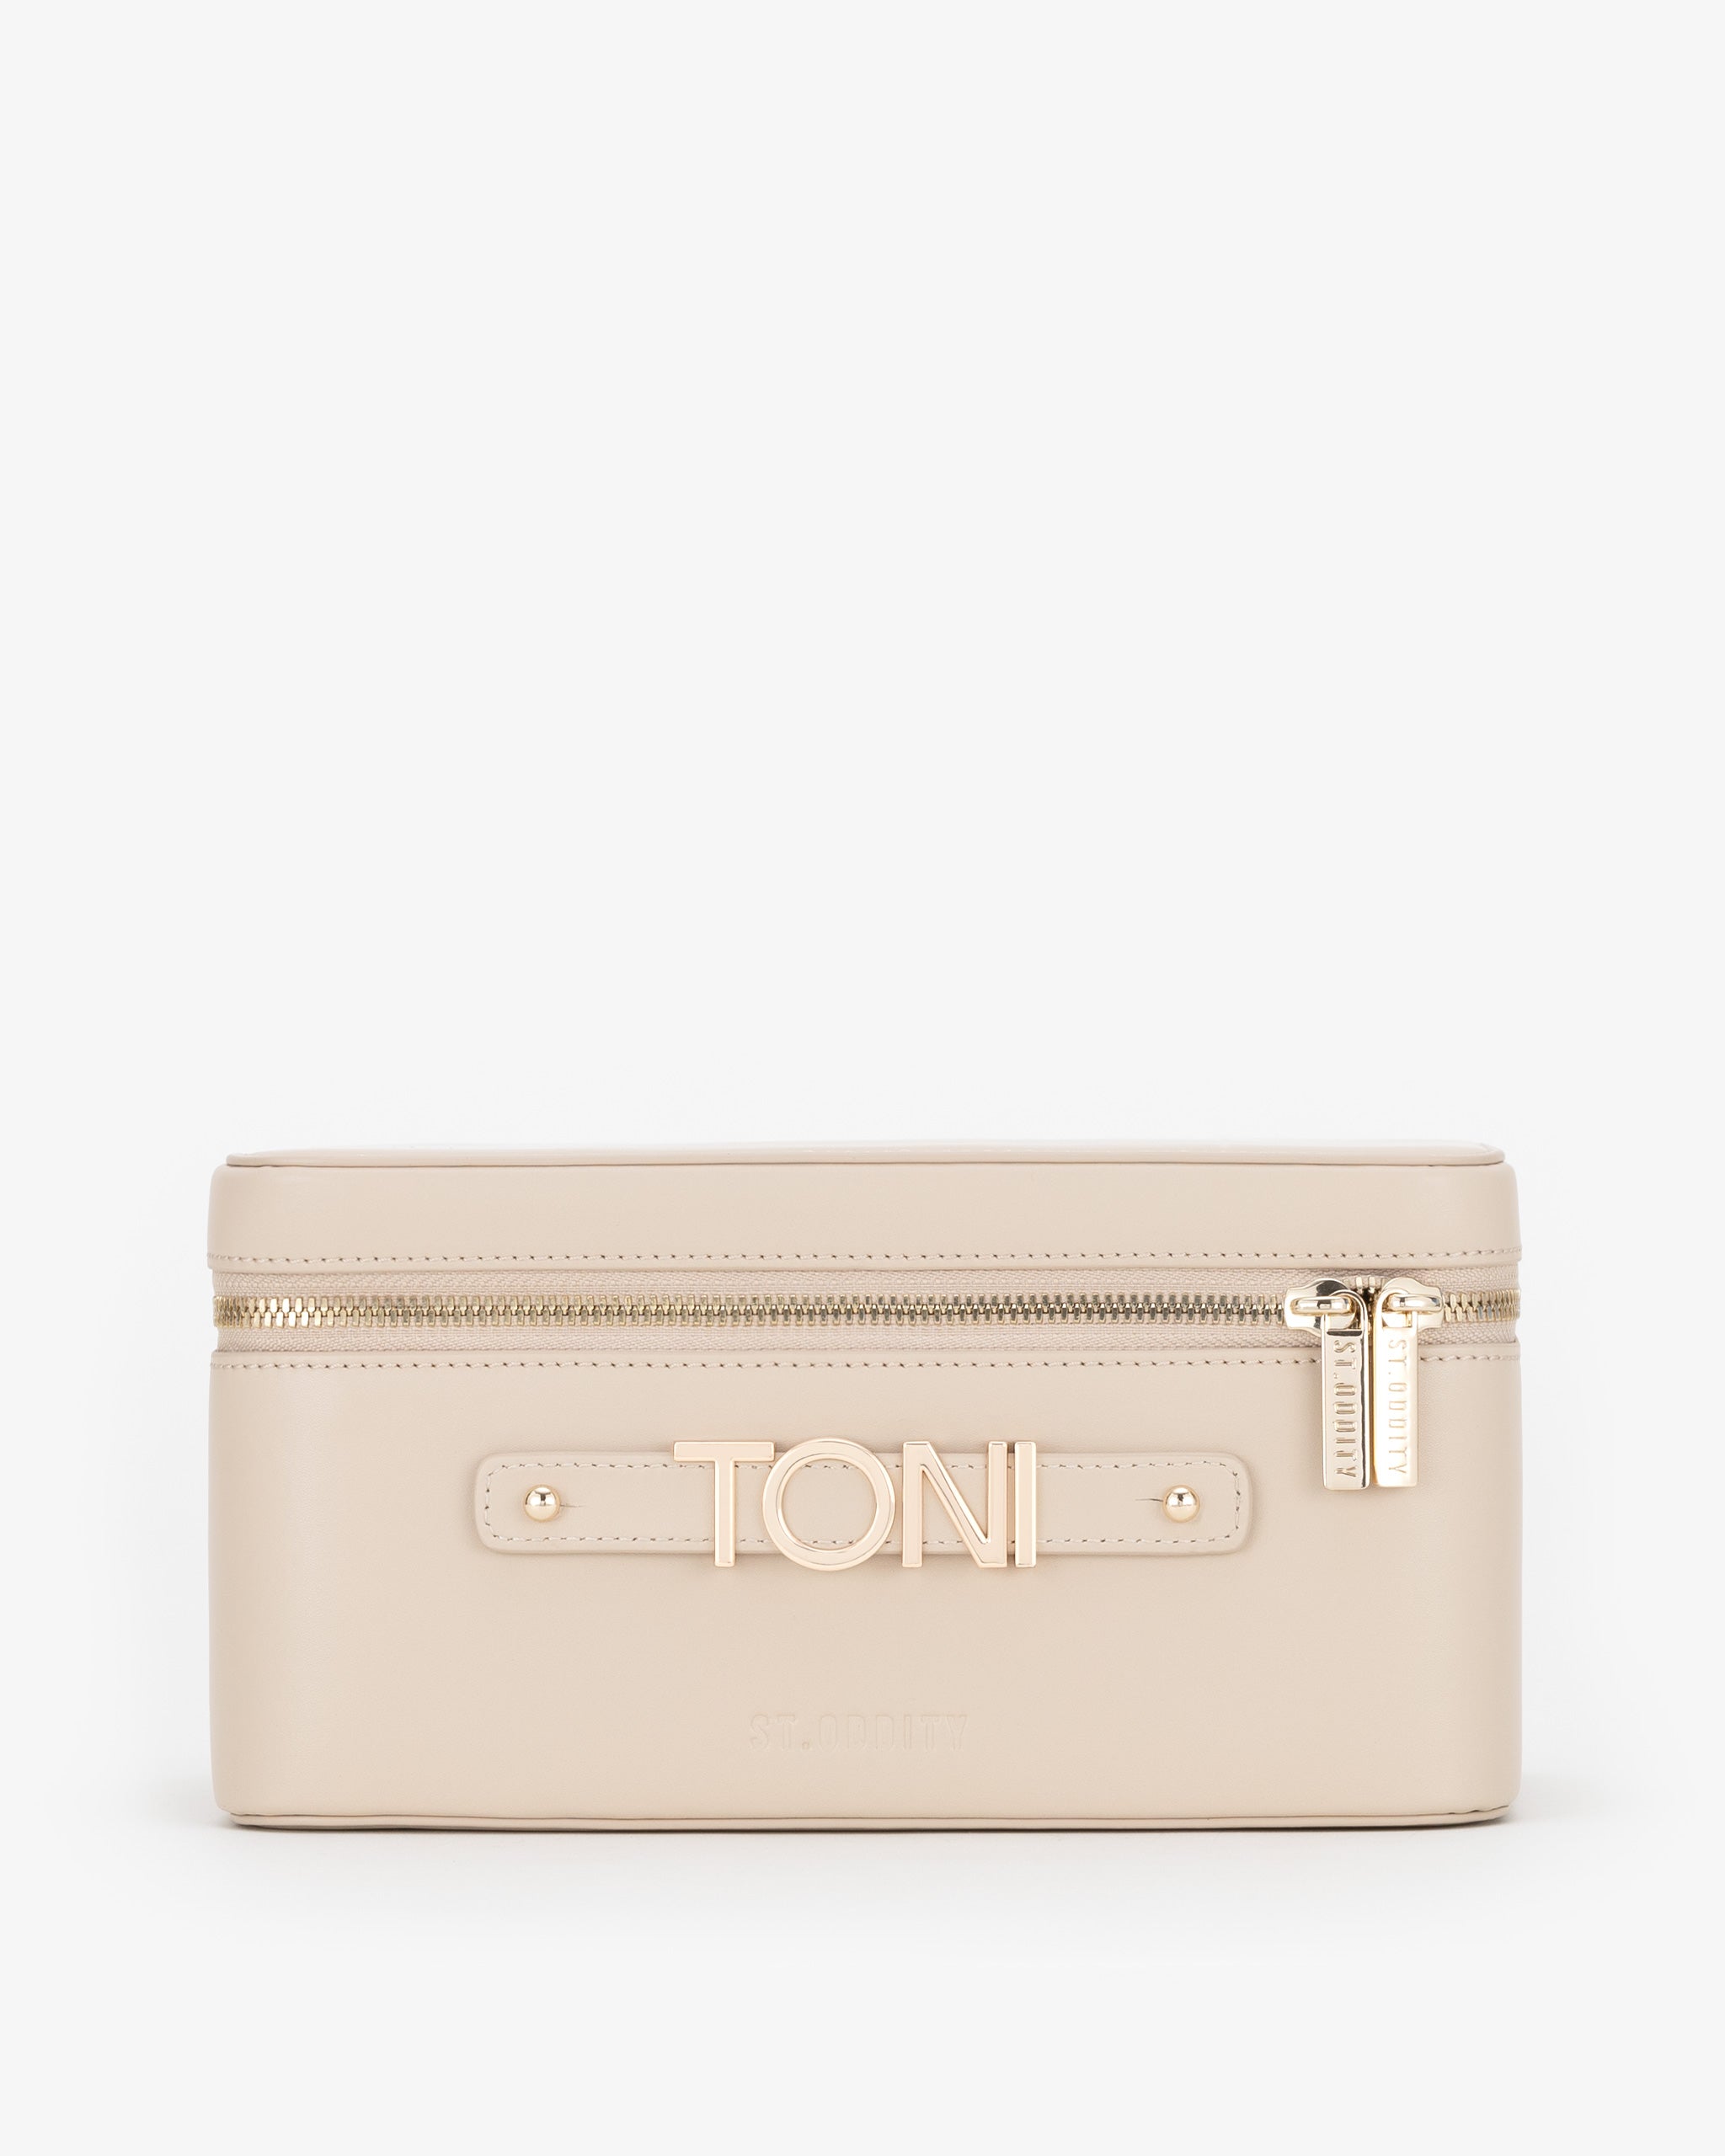 Vanity Case in Light Sand with Personalised Hardware